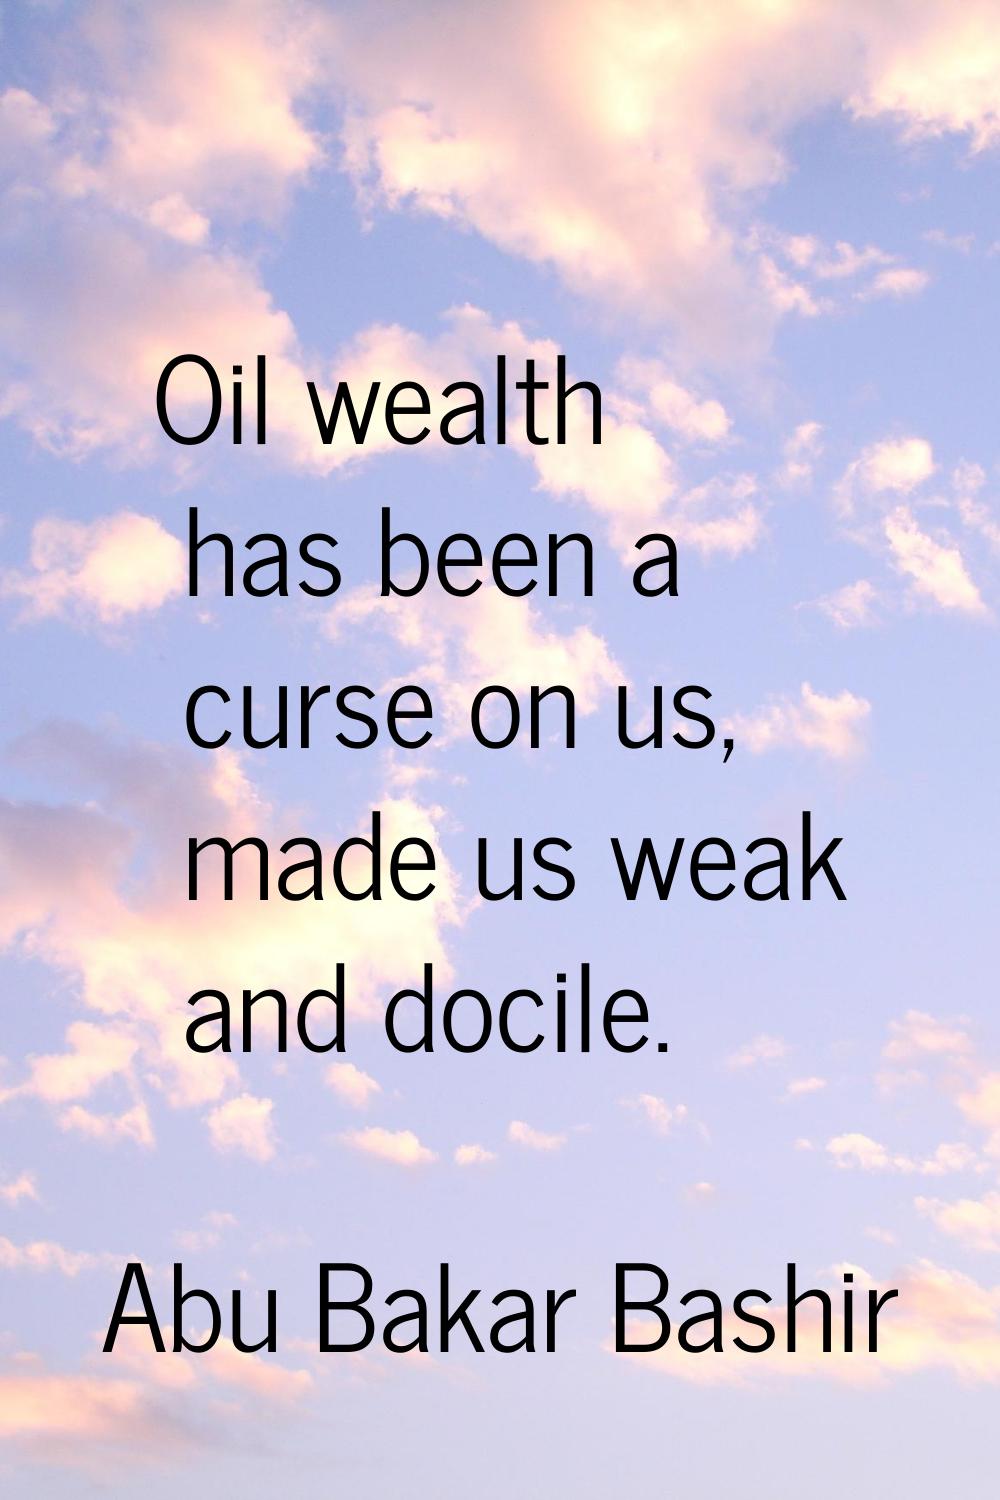 Oil wealth has been a curse on us, made us weak and docile.